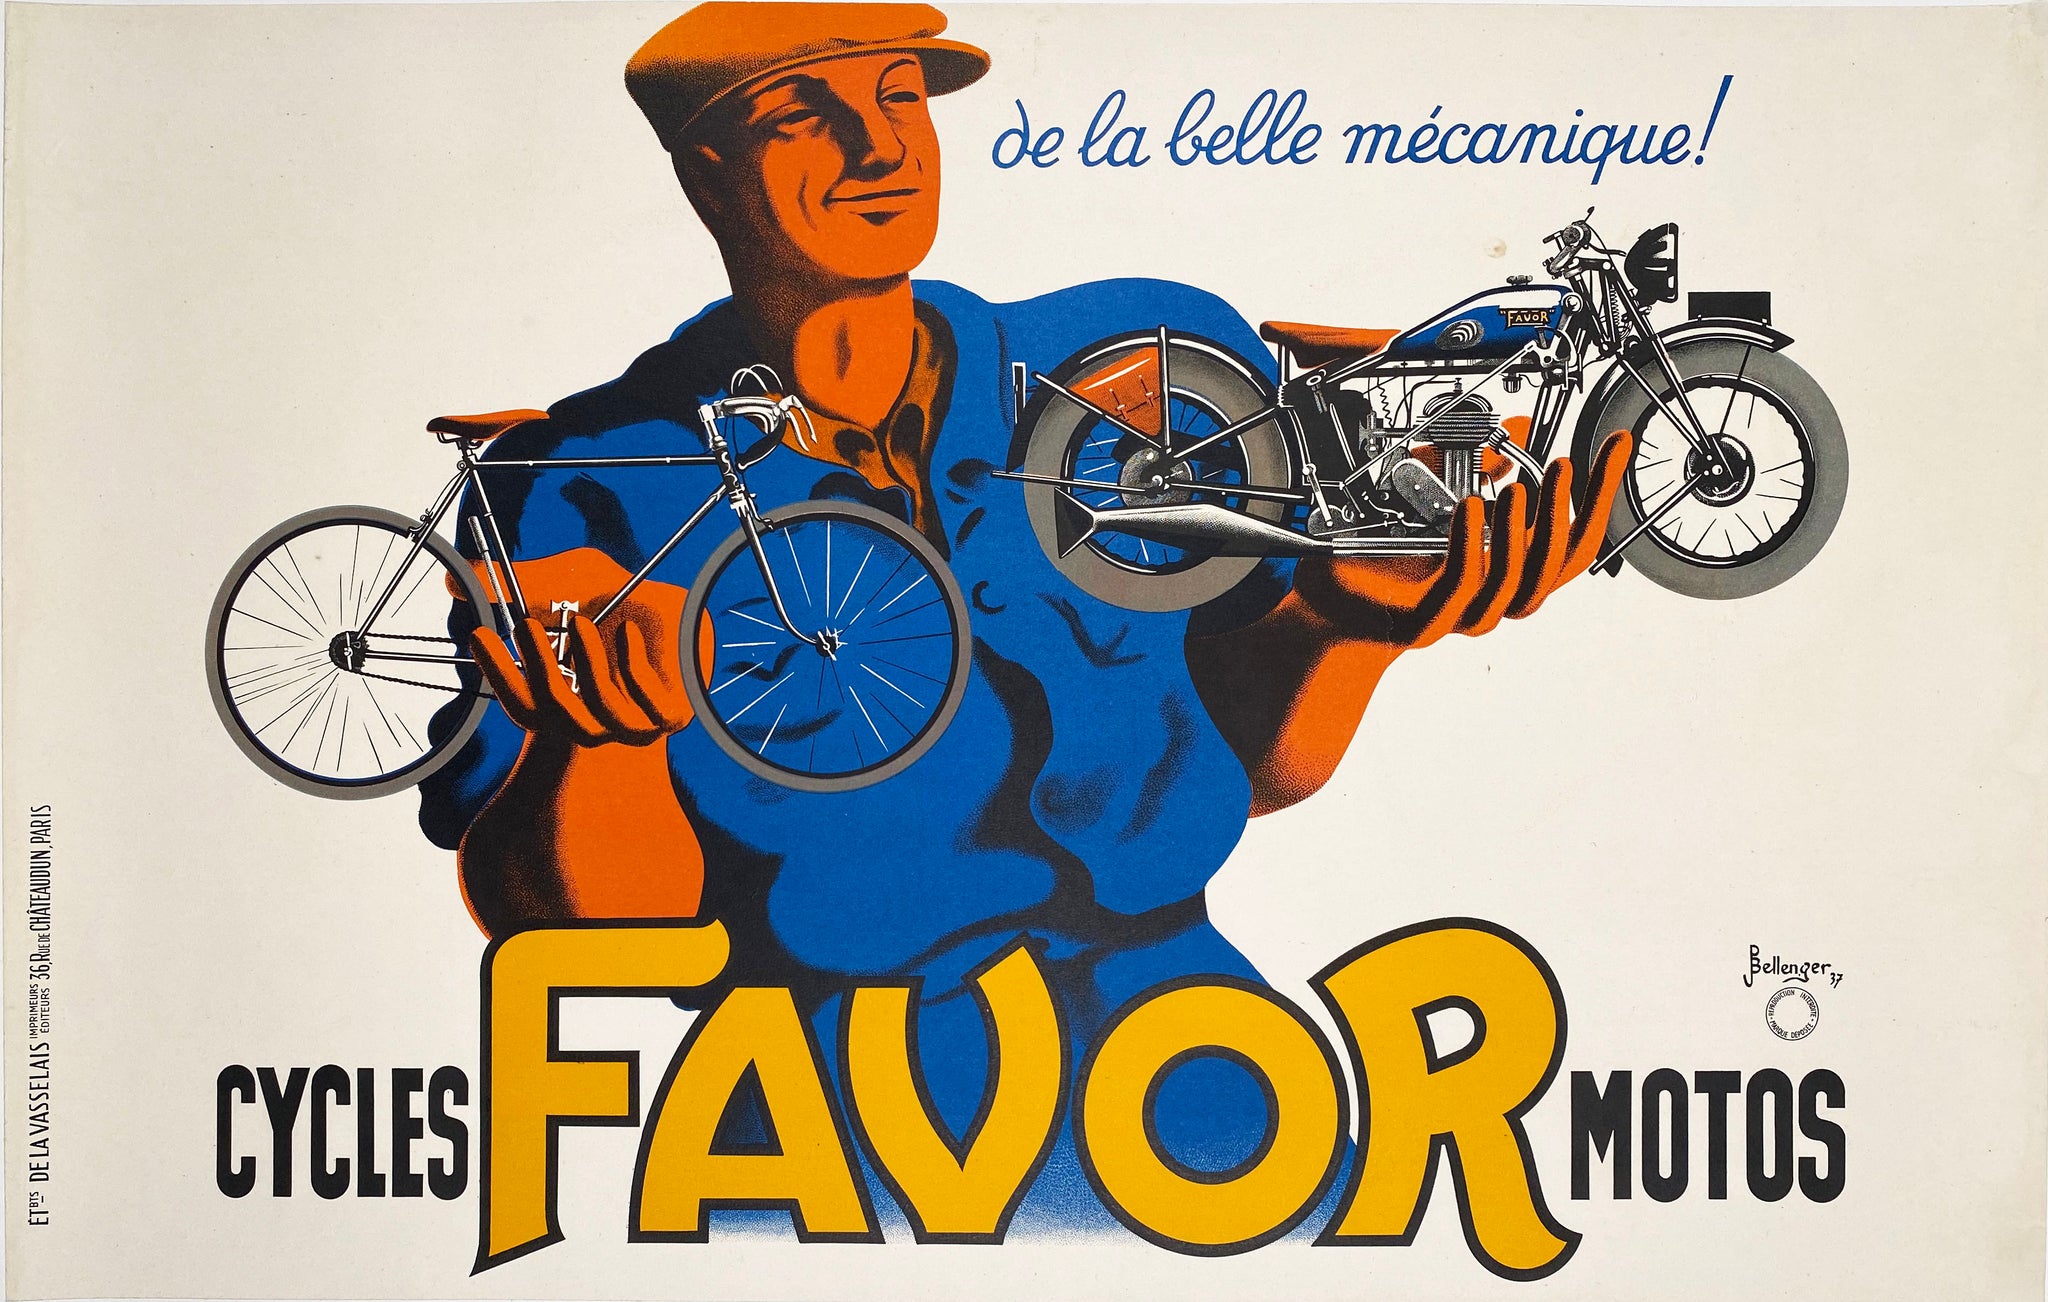 FAVOR - Vintage French cycles poster 1937